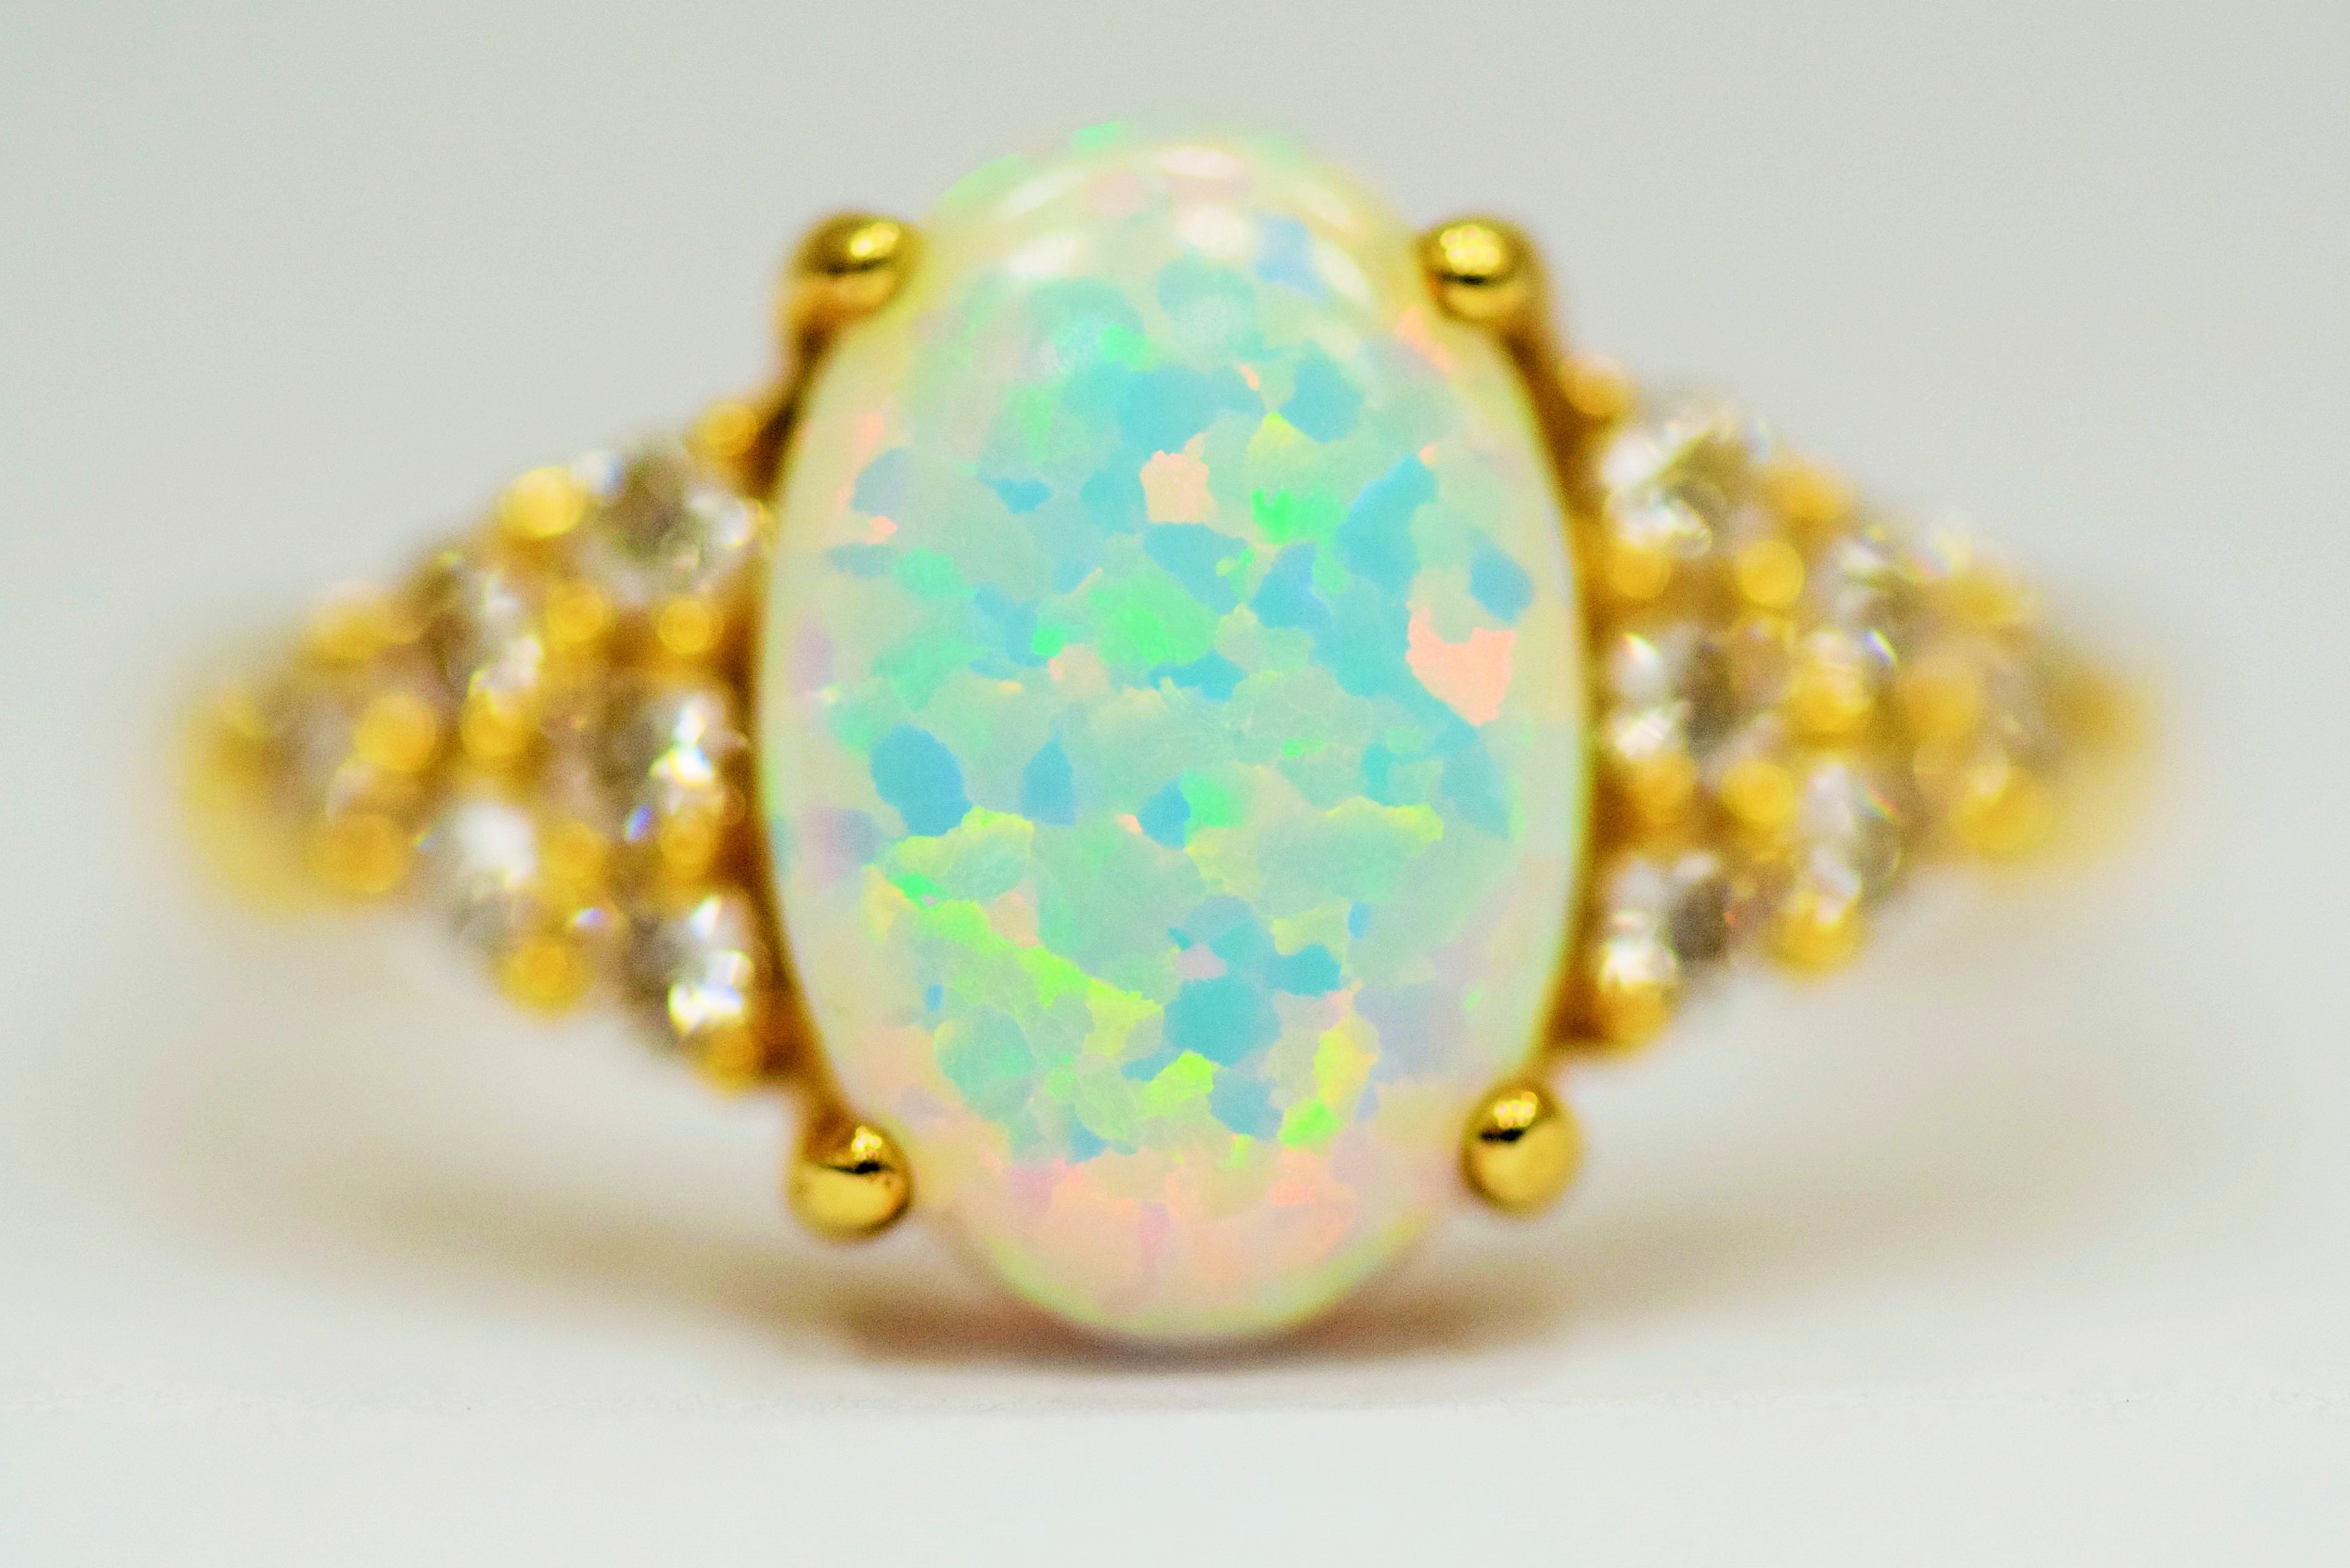 14ct Yellow Gold Ring set with a large central Opal which measures 12 x 8mm with 12 clear gemstones 